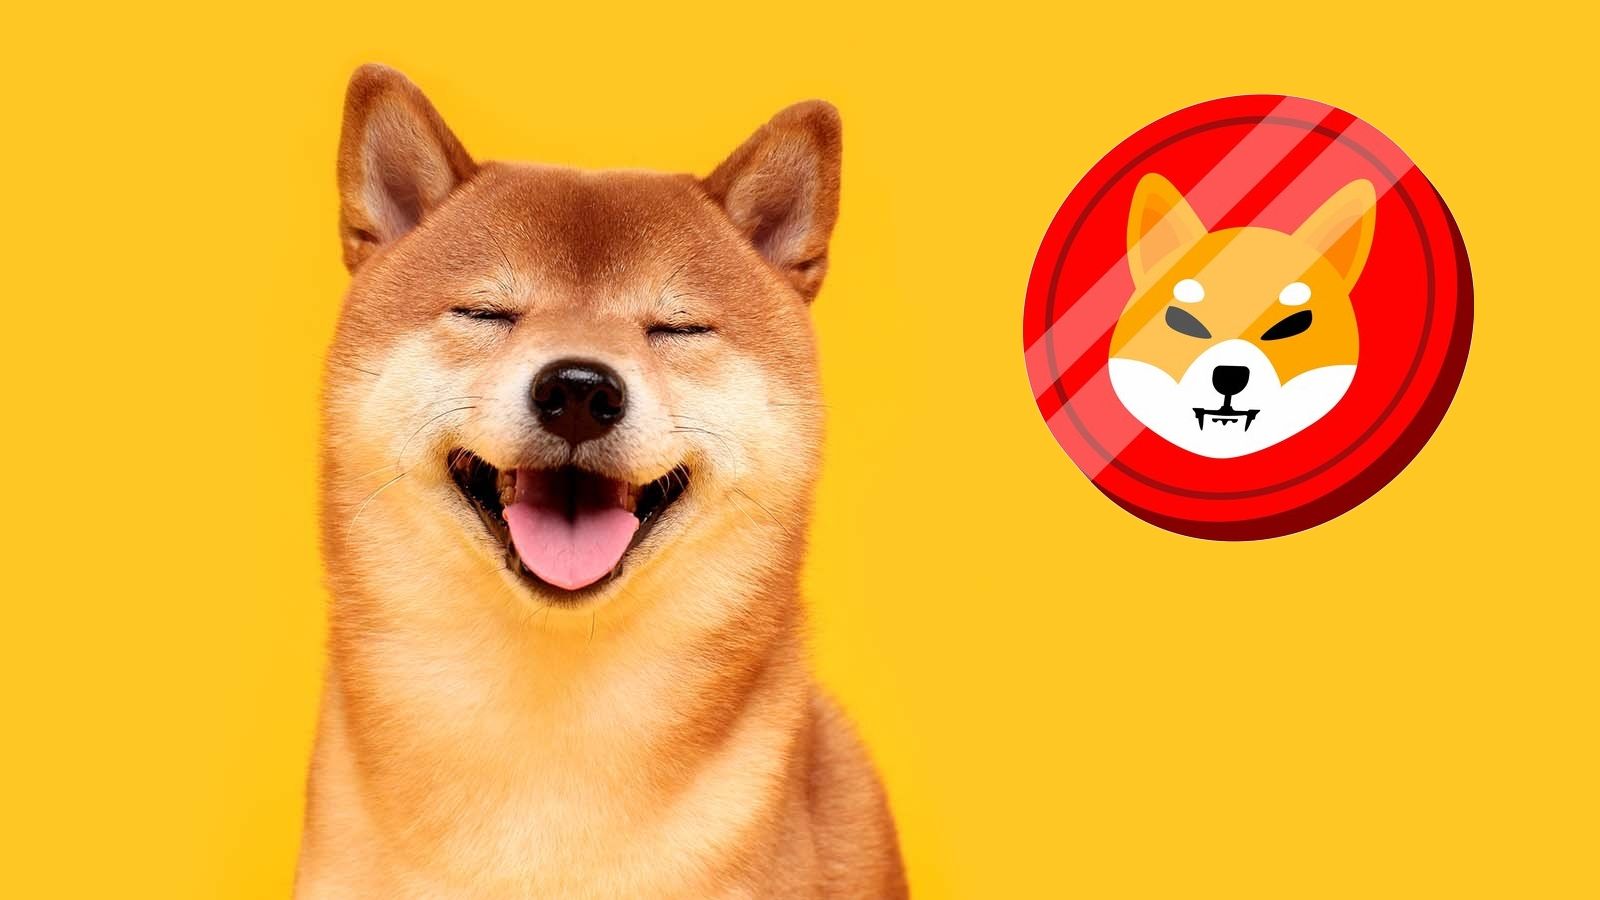 Mark Zuckerberg's sister urges to buy Shiba Inu cryptocurrency, which has risen in price by 90,000,000% since launch